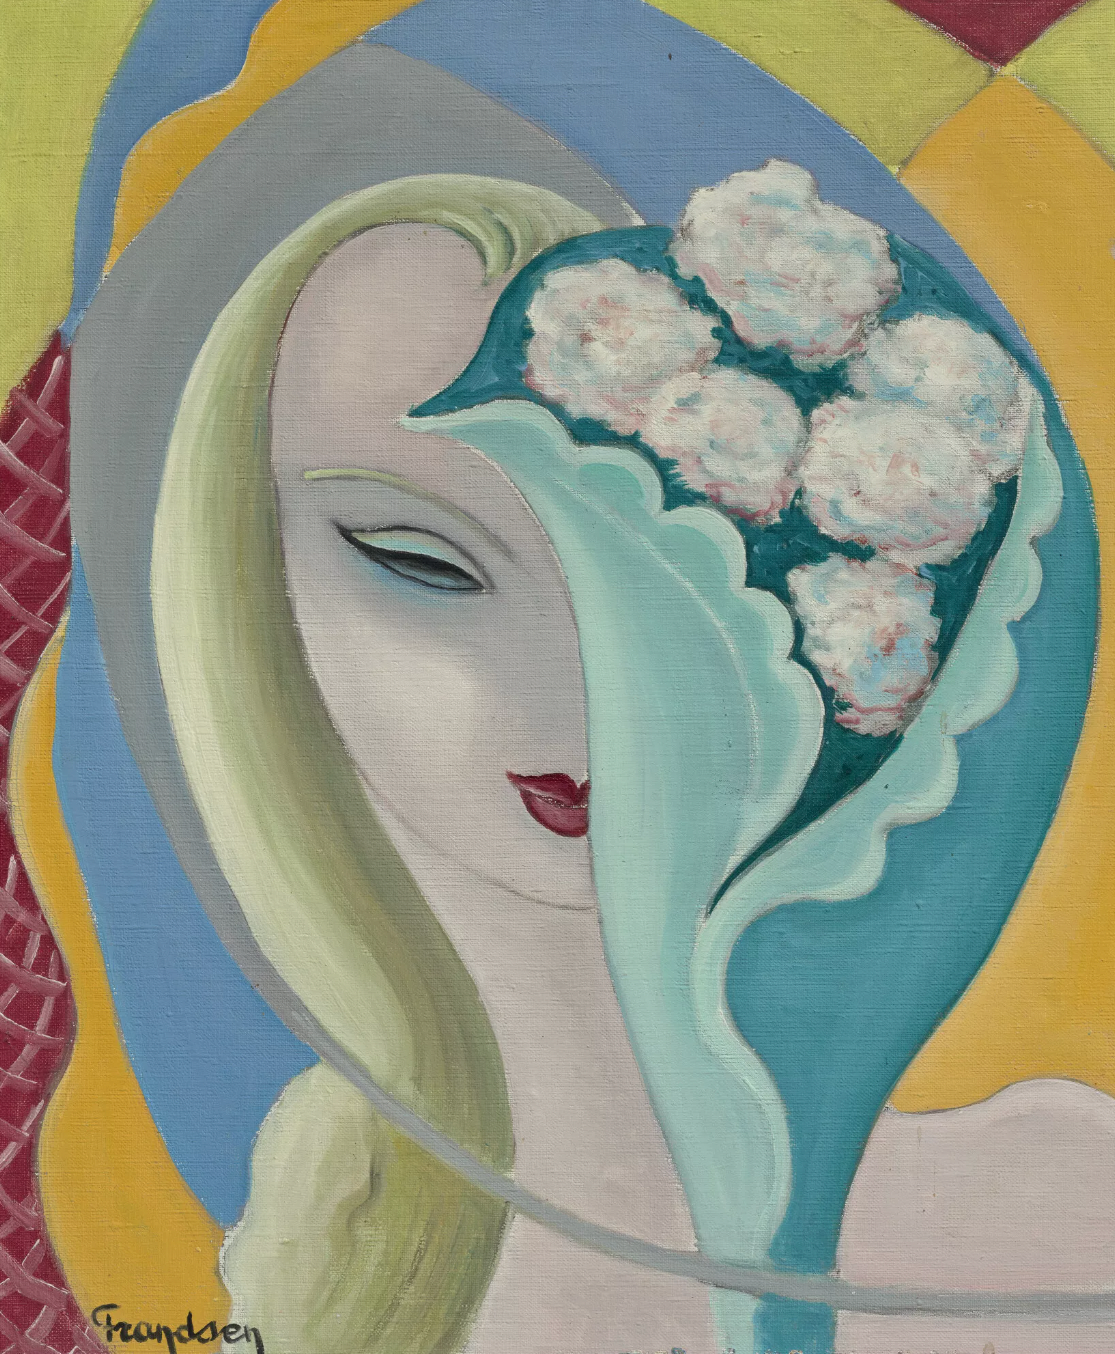 The original artwork for the cover of Derek and the Dominos album is also up for sale